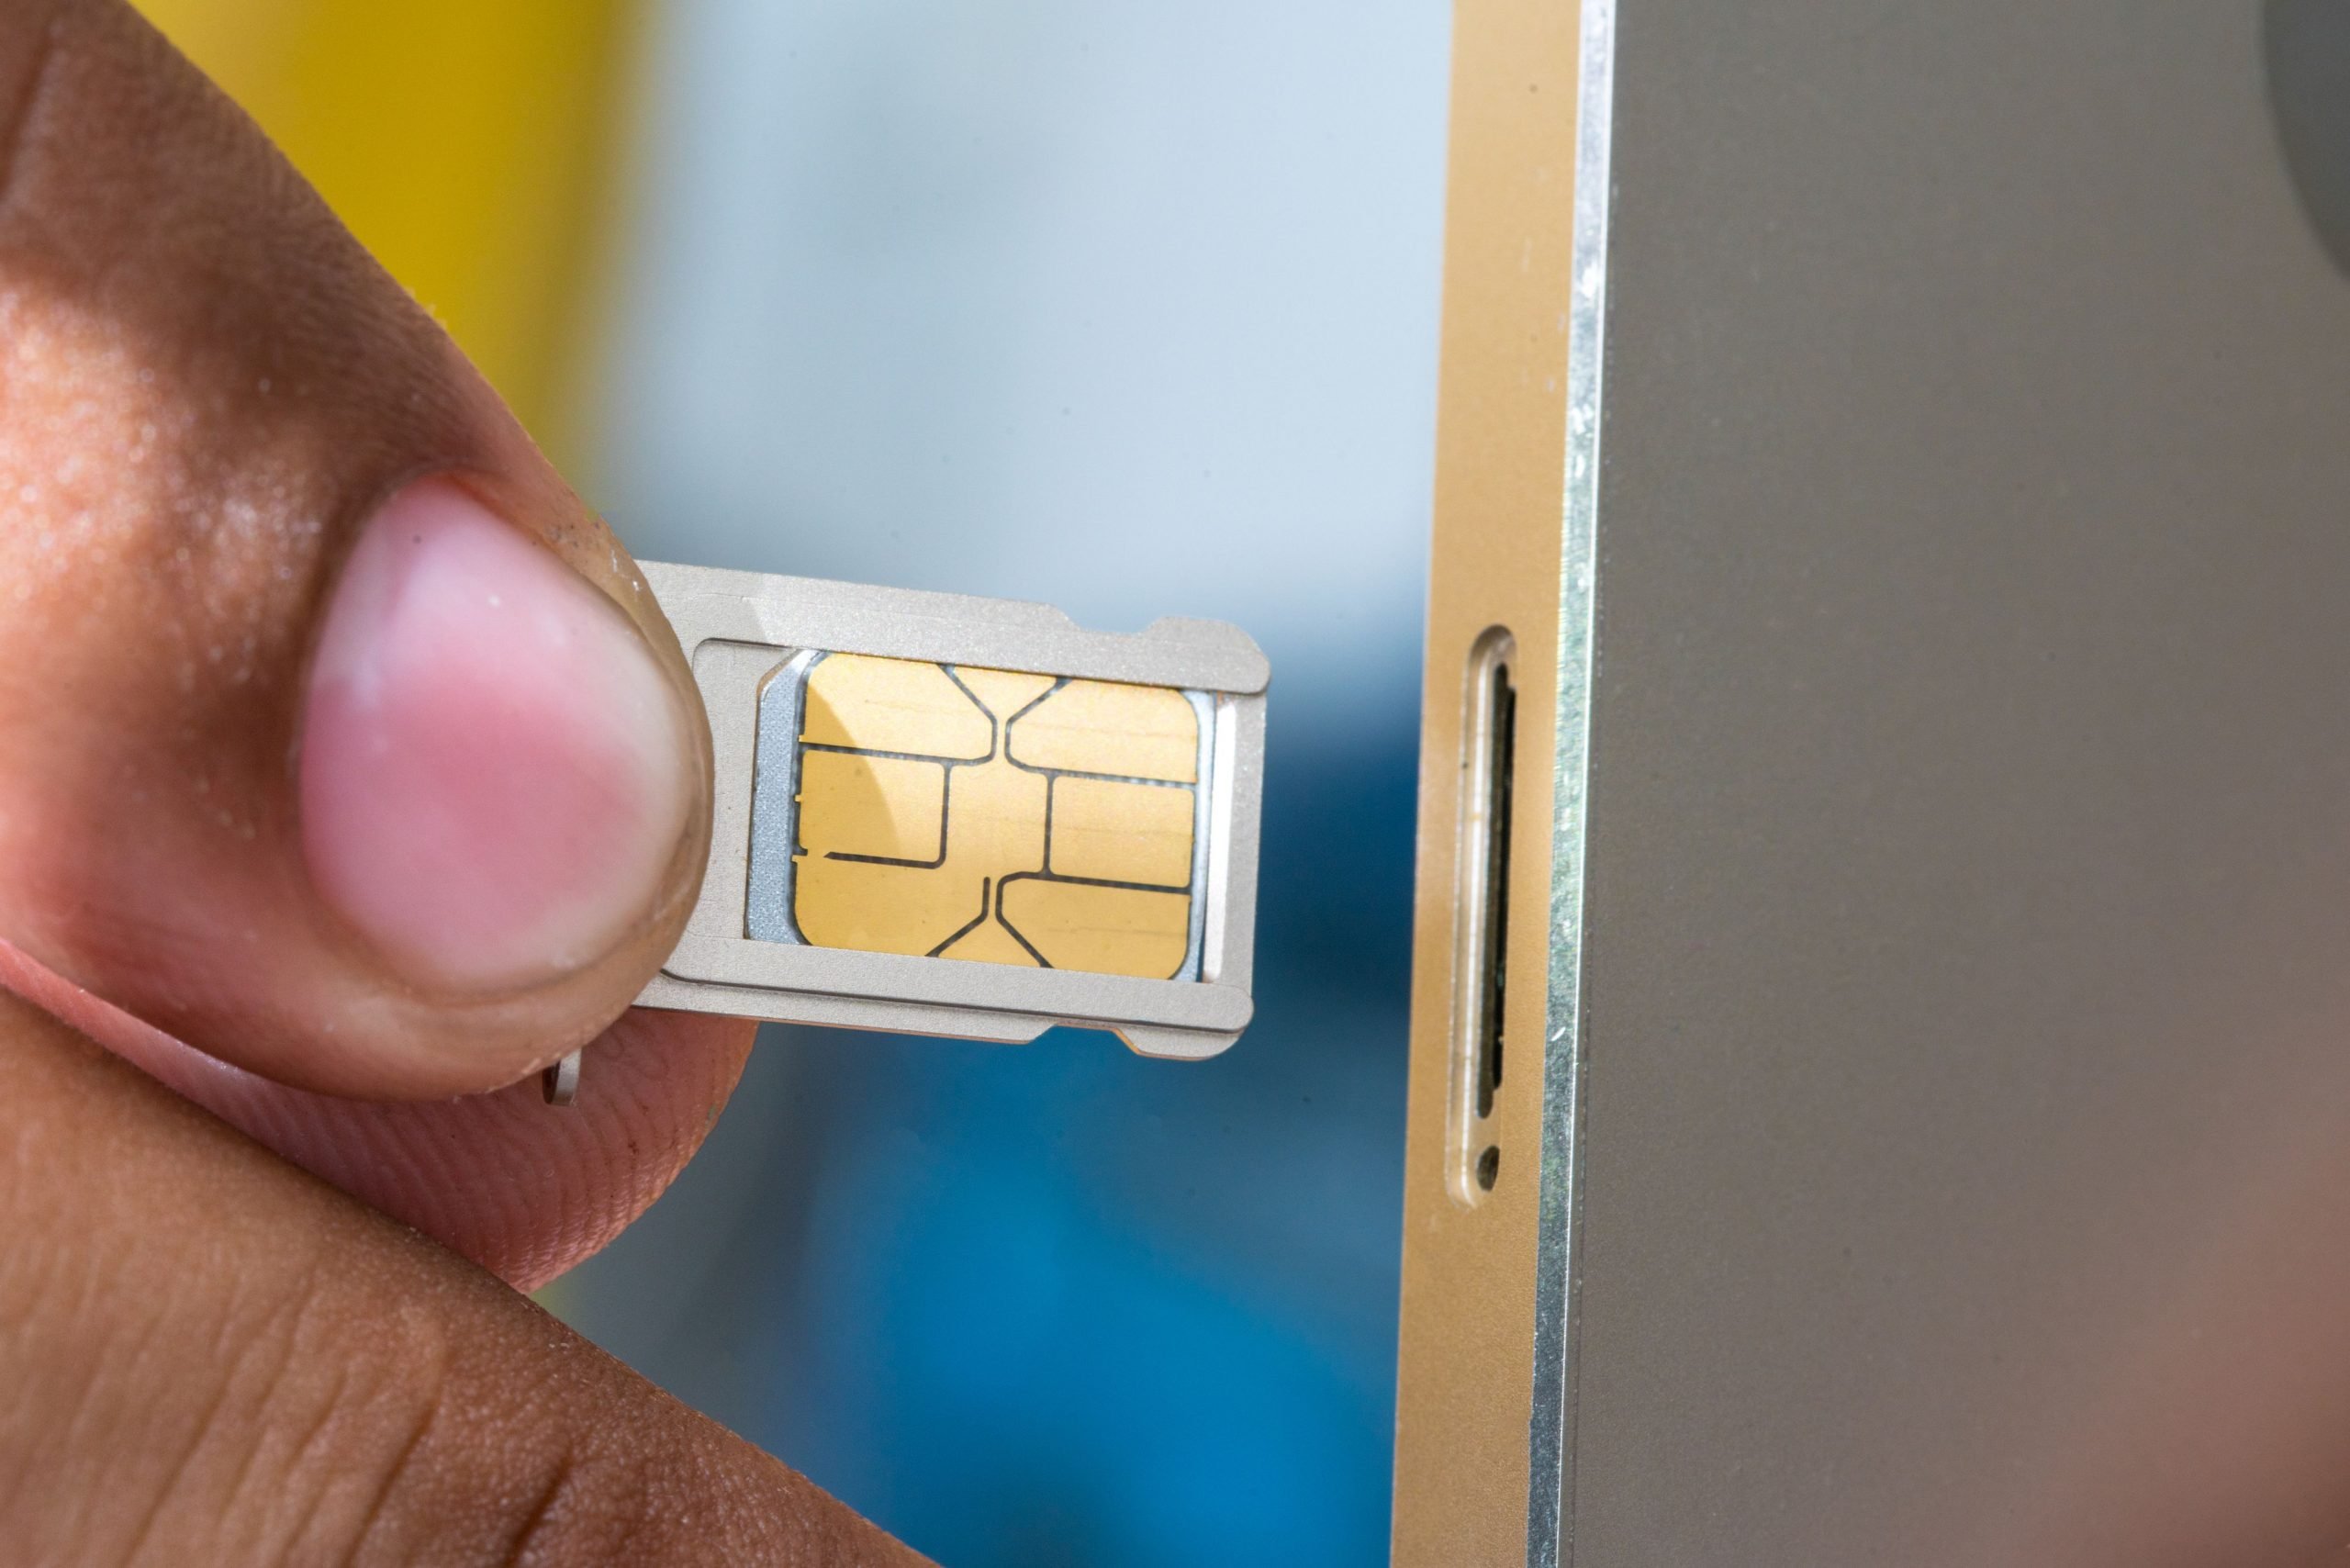 How to Remove the SIM Card From Your iPhone